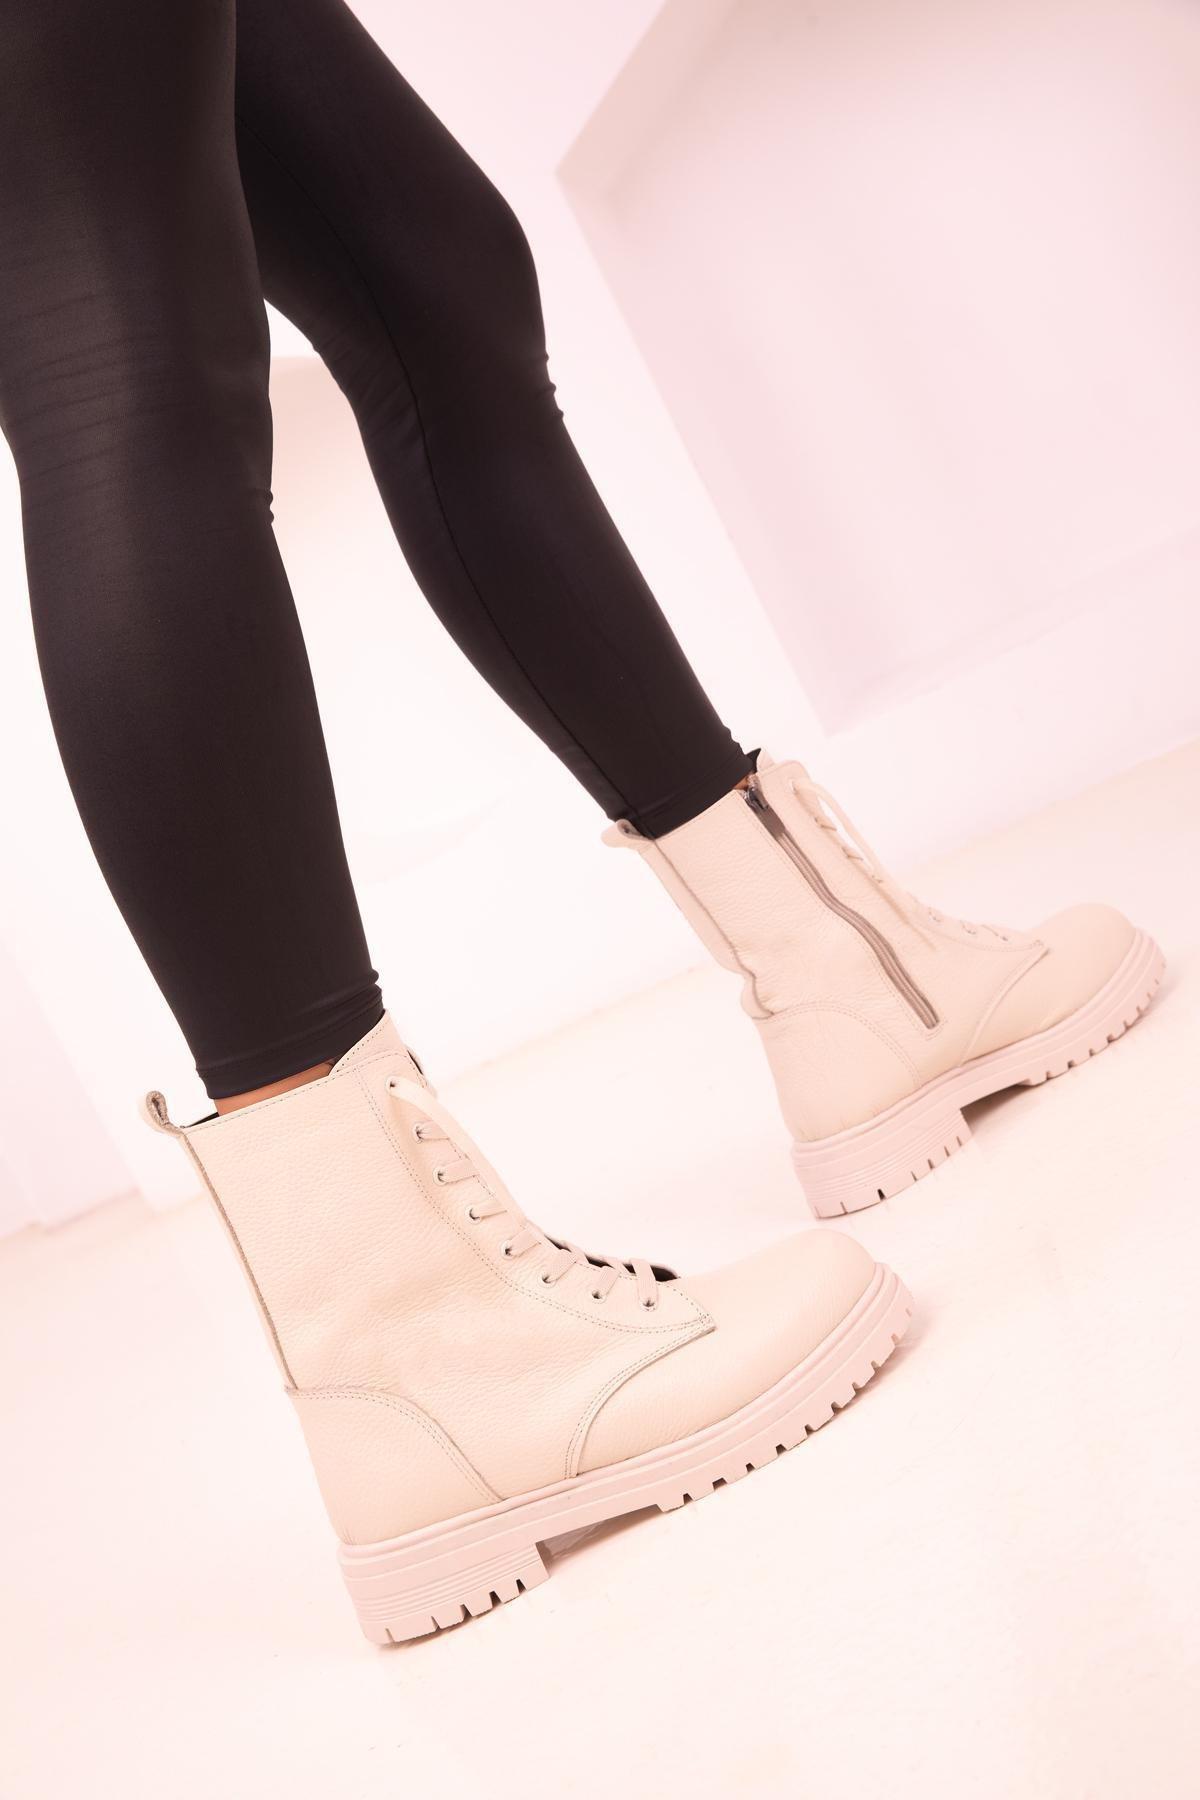 SOHO - Beige Zippered Ankle Boots